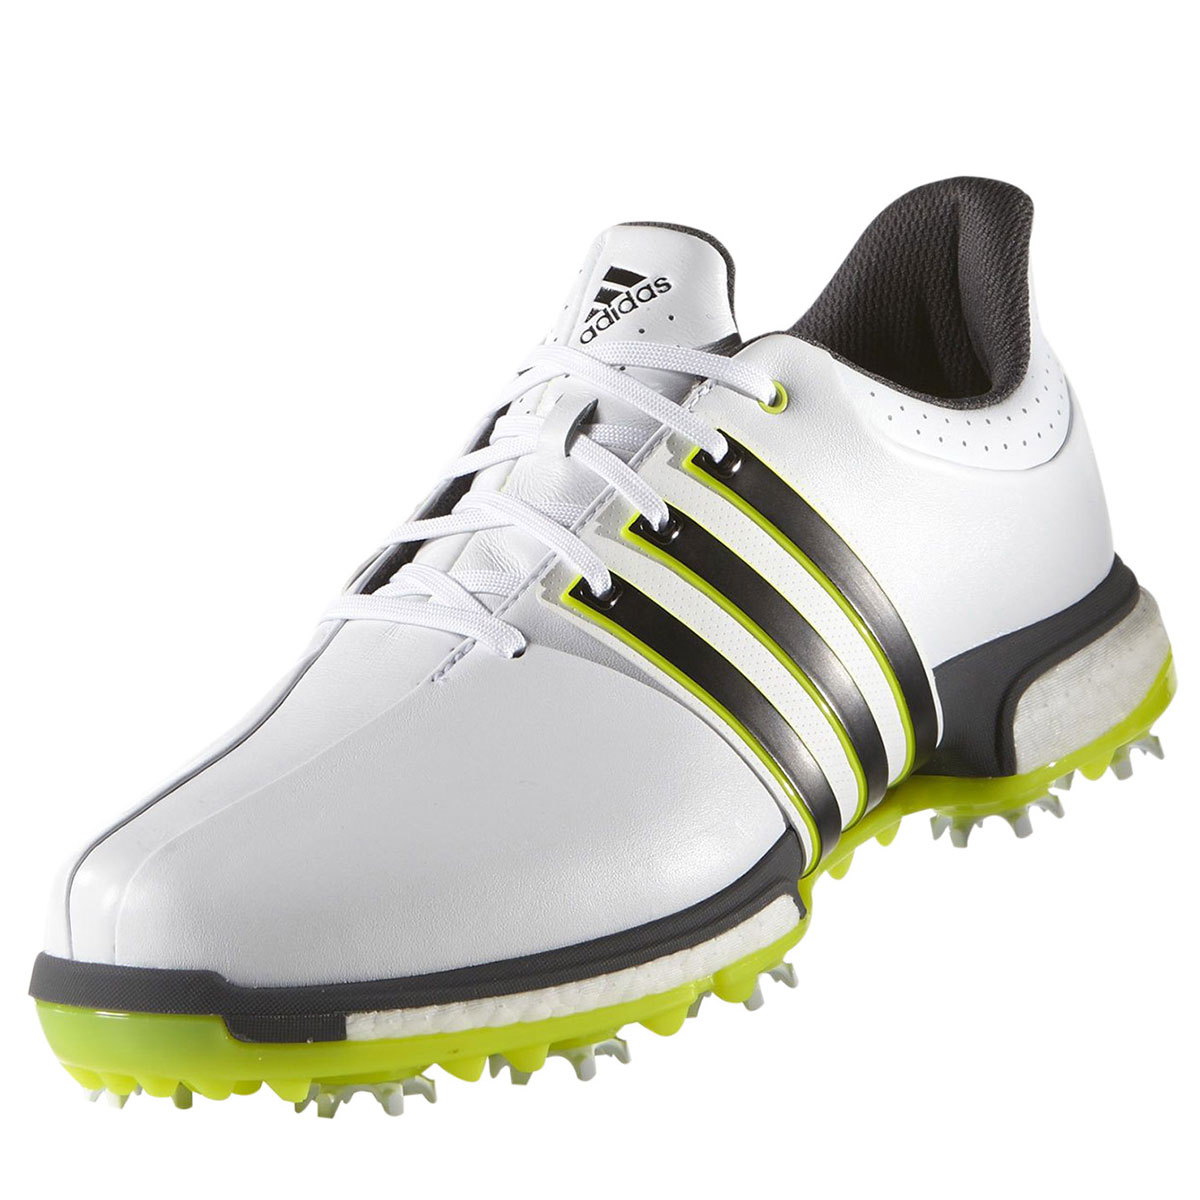 adidas tour boost 360 golf shoes